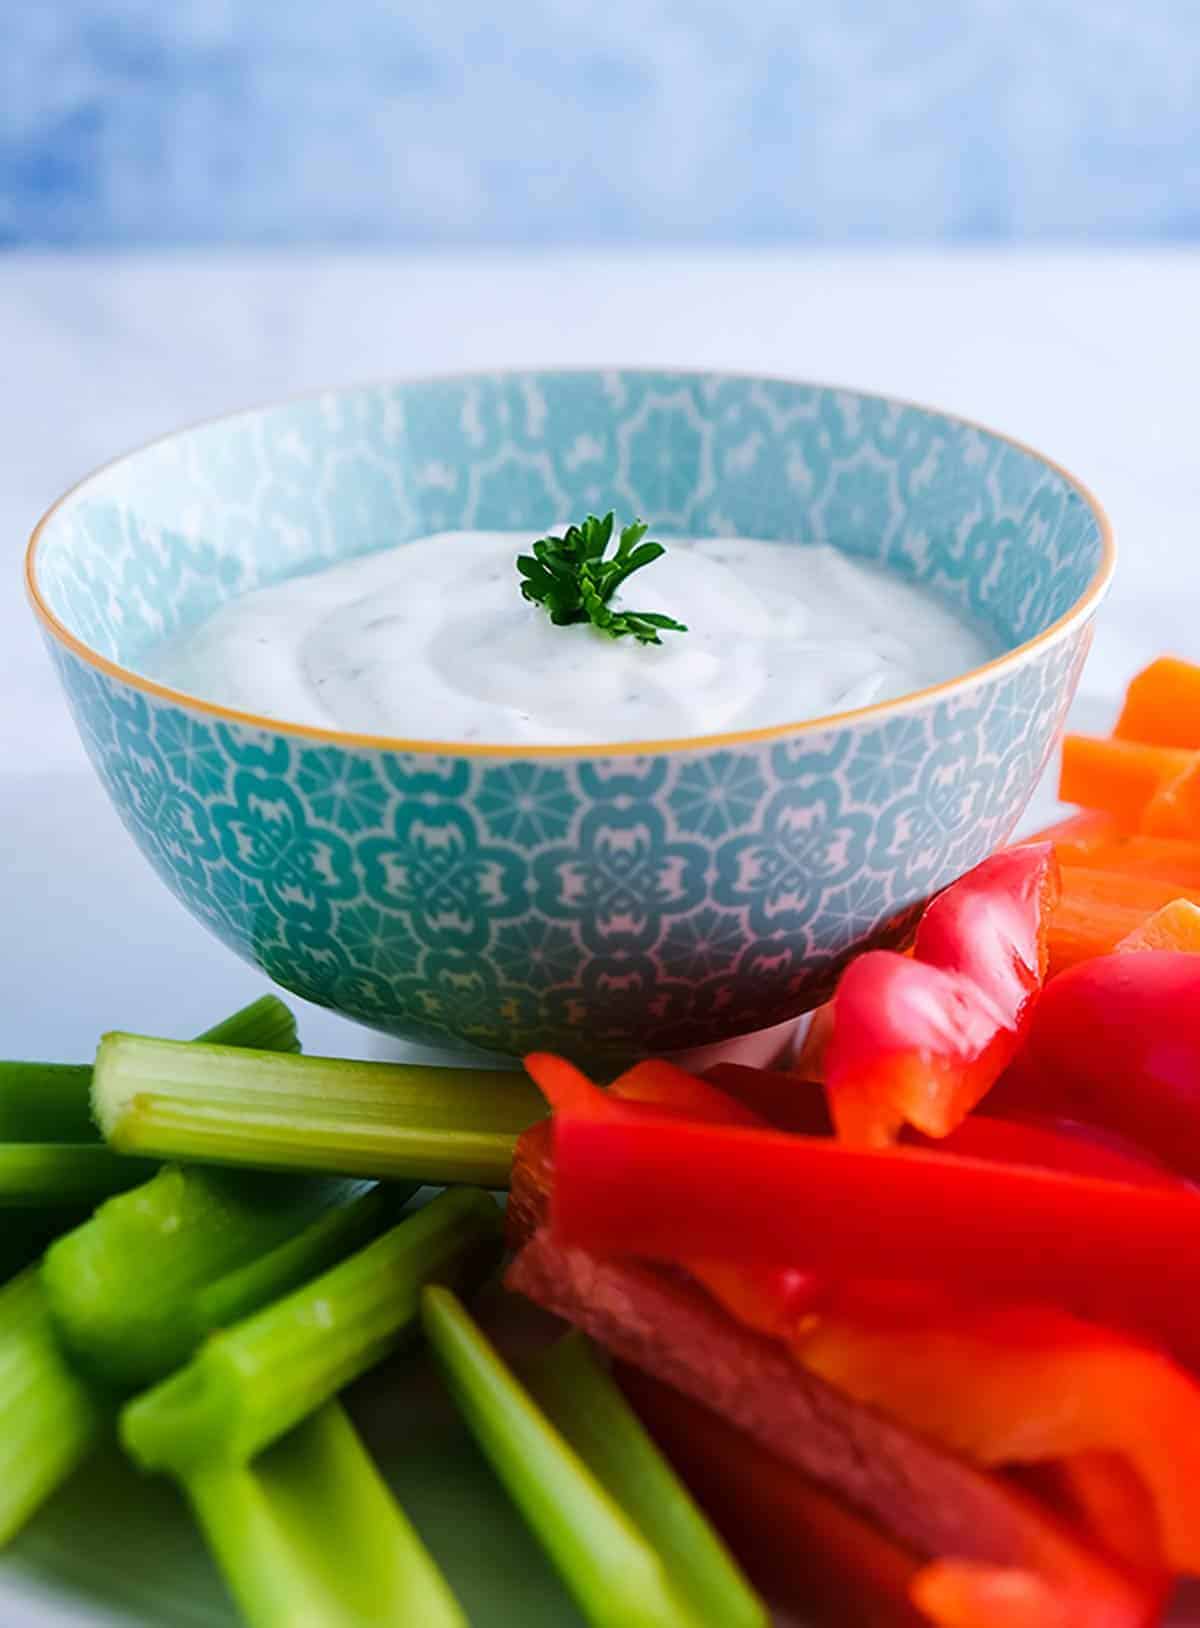 A bowl of ranch dip with crudites